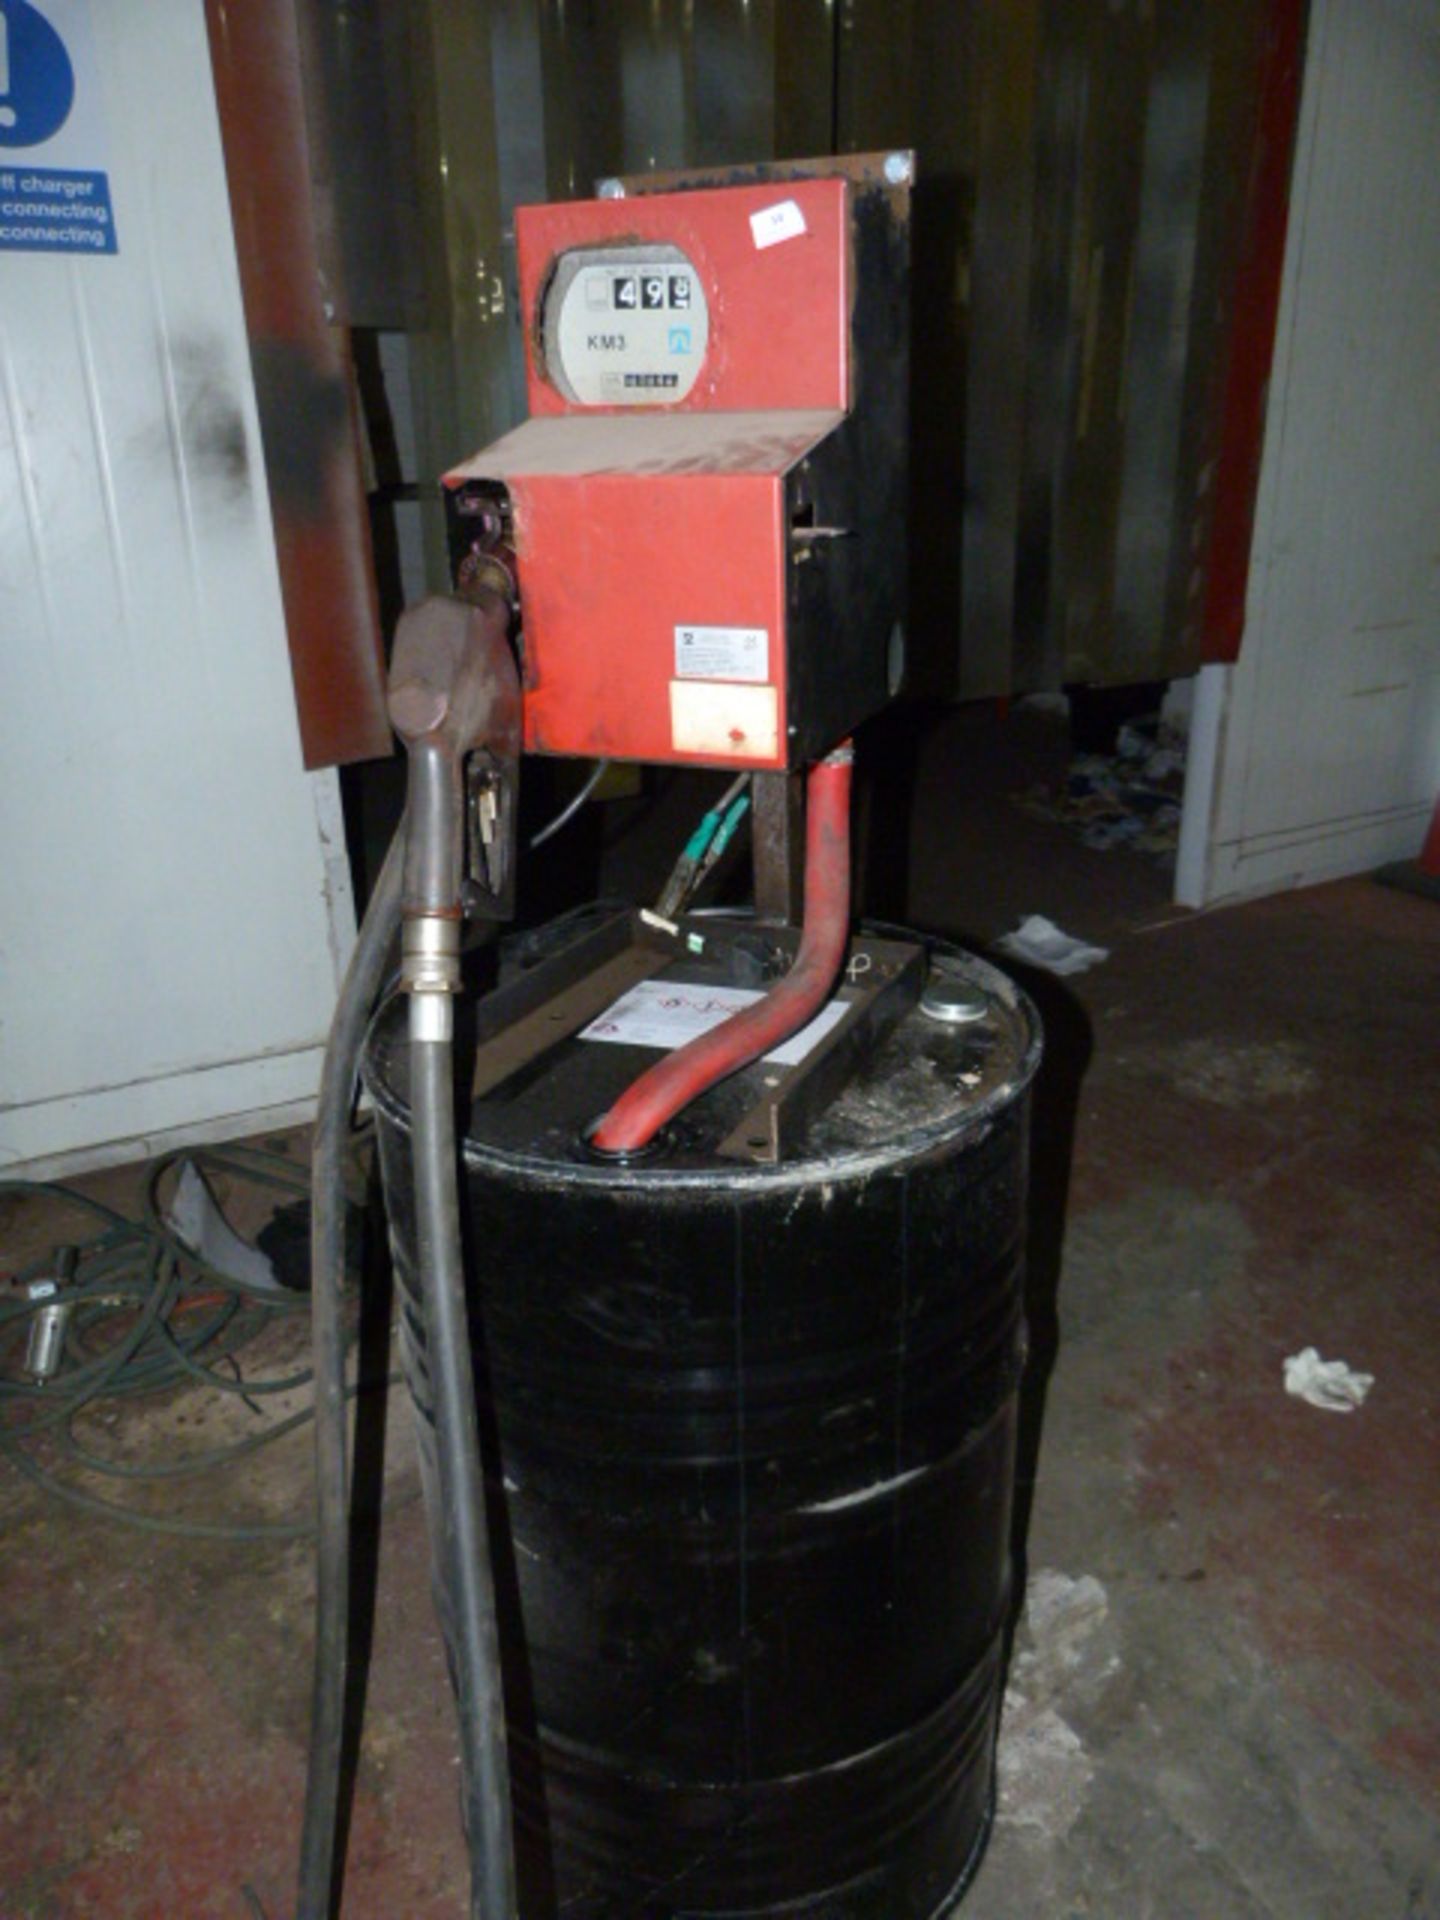 *45 Gallon Drum Complete With KM3 Fuel Delivery Unit